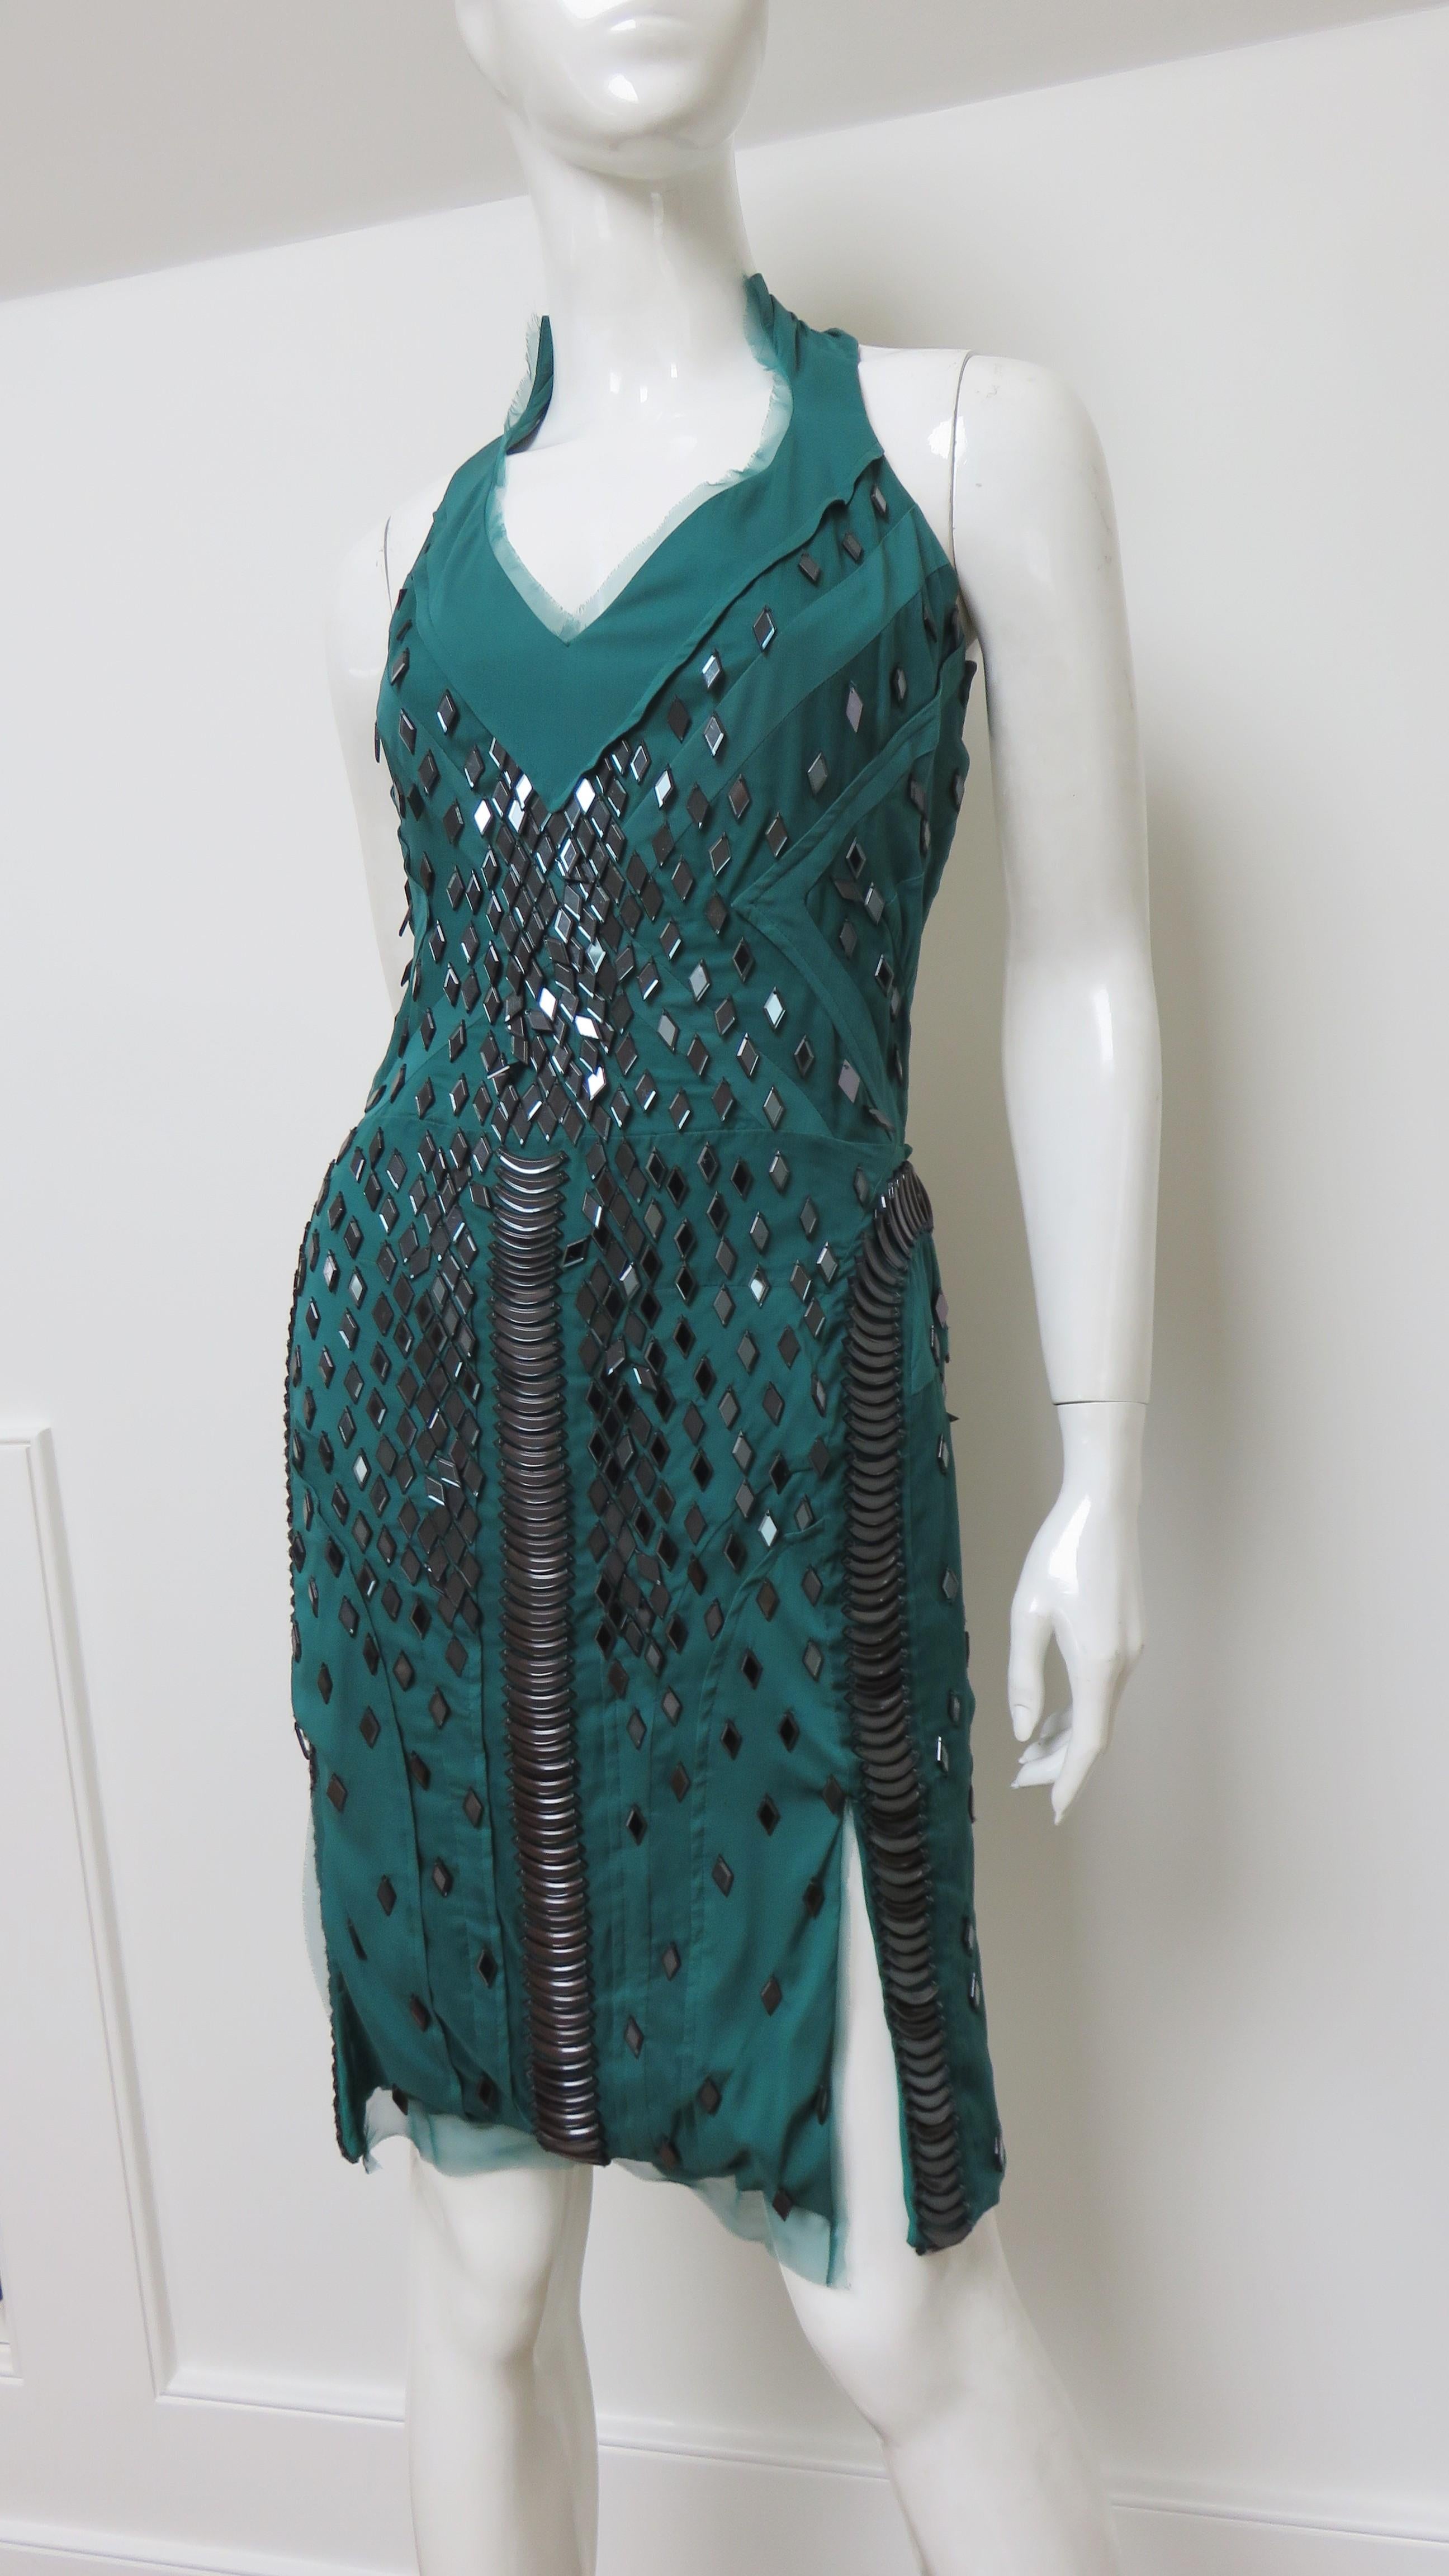  Gucci S/S 2005 New Silk Backless Dress with Appliques In Excellent Condition For Sale In Water Mill, NY